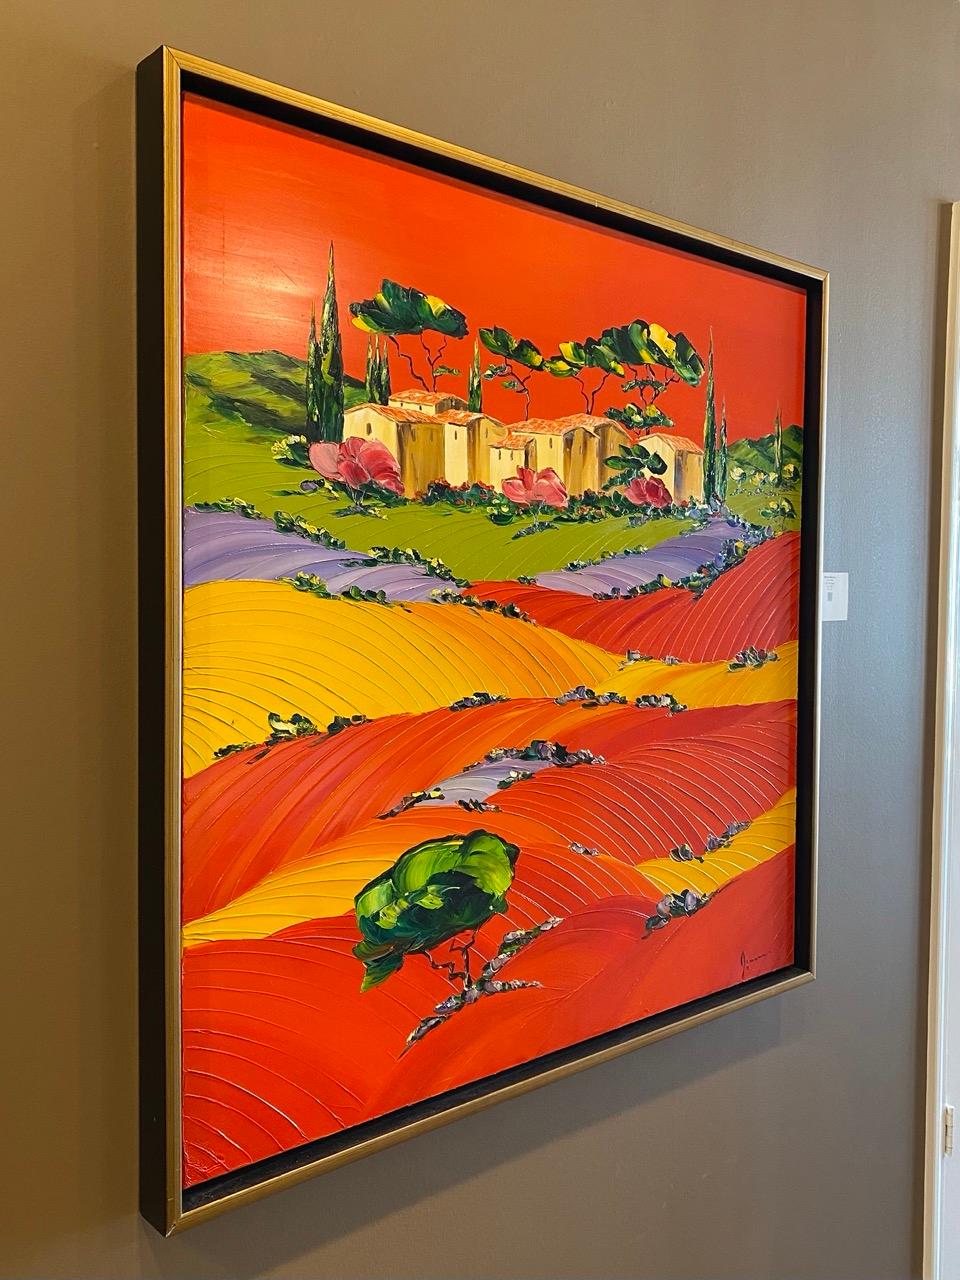 Monika Meunier's All in Red consists of oil on canvas, is sized at 39 x 39 inches, and is priced at $7,150.

Meunier's works present collectors with idealized versions of the beautiful region which surrounds her studio. Towering amid cypress and